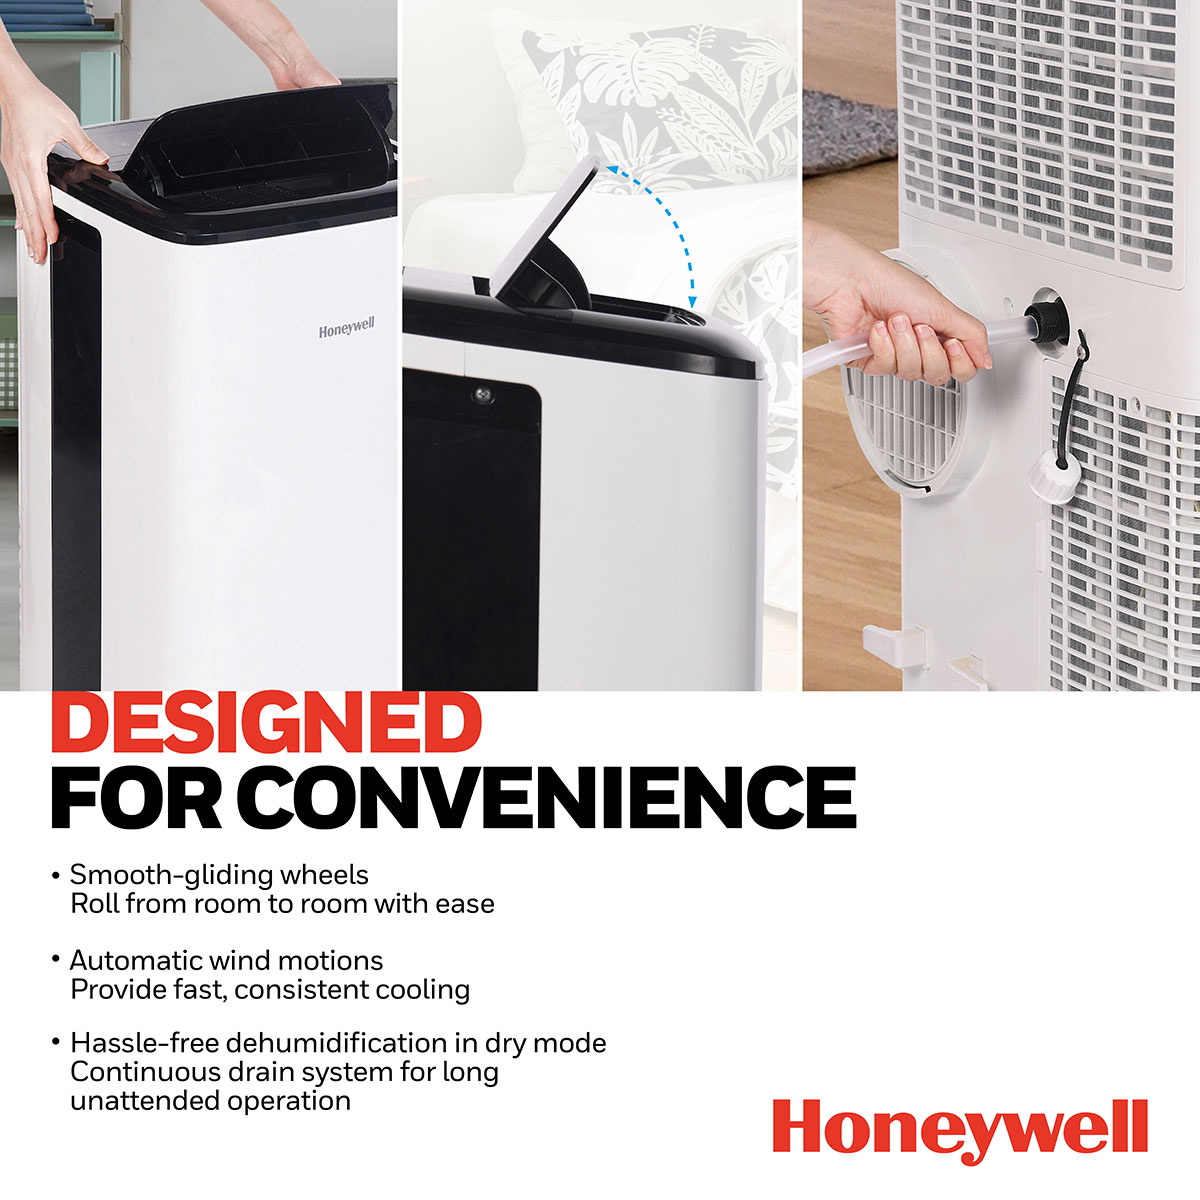 Honeywell WiFi Portable Air Conditioner Features